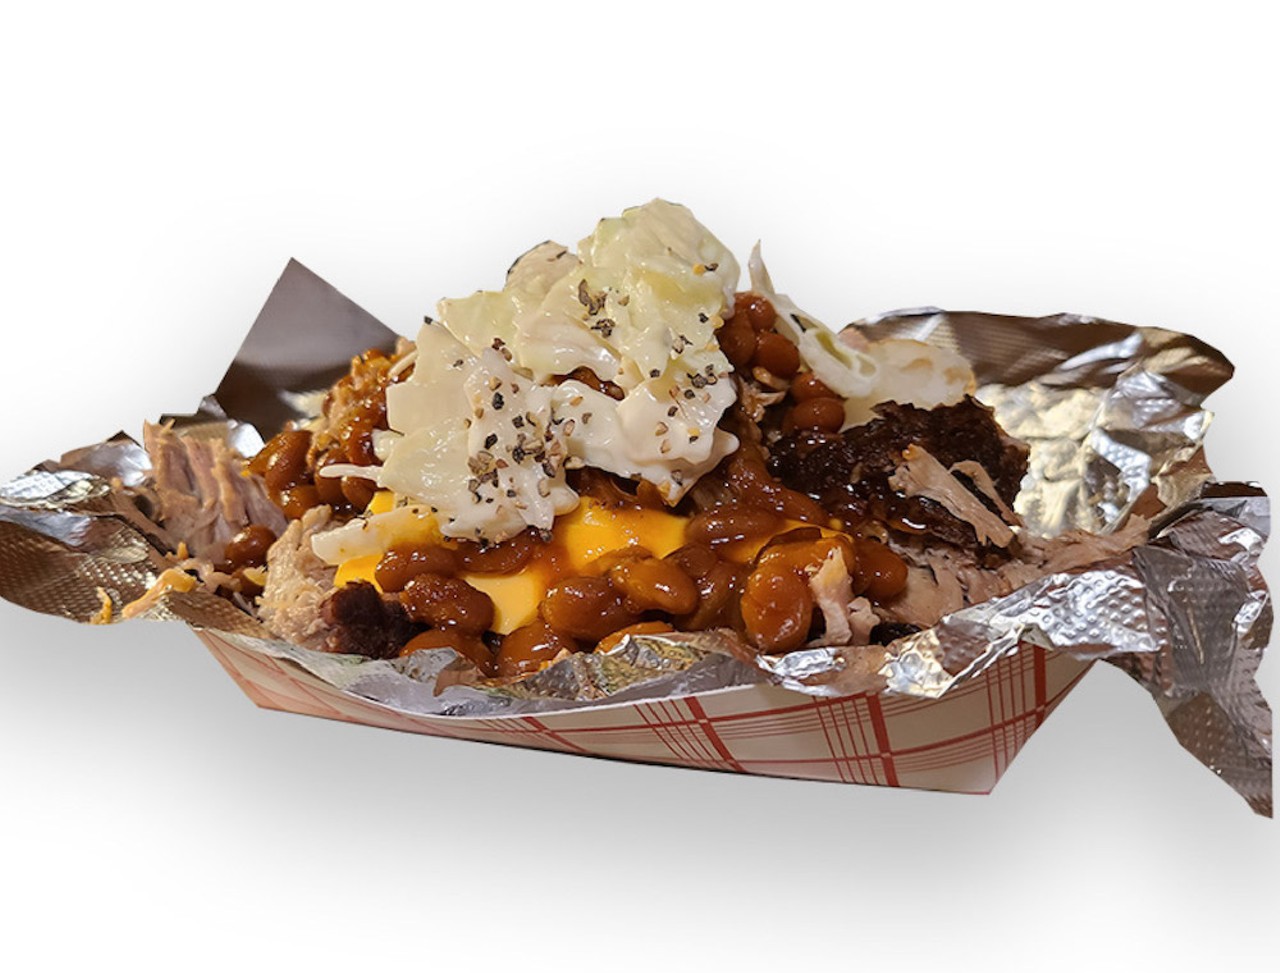 Hog Trof         
"A baked potato, pulled pork, baked beans, cheese, and topped with creamy coleslaw."                  
Where to find it: Rising Smoke BBQ